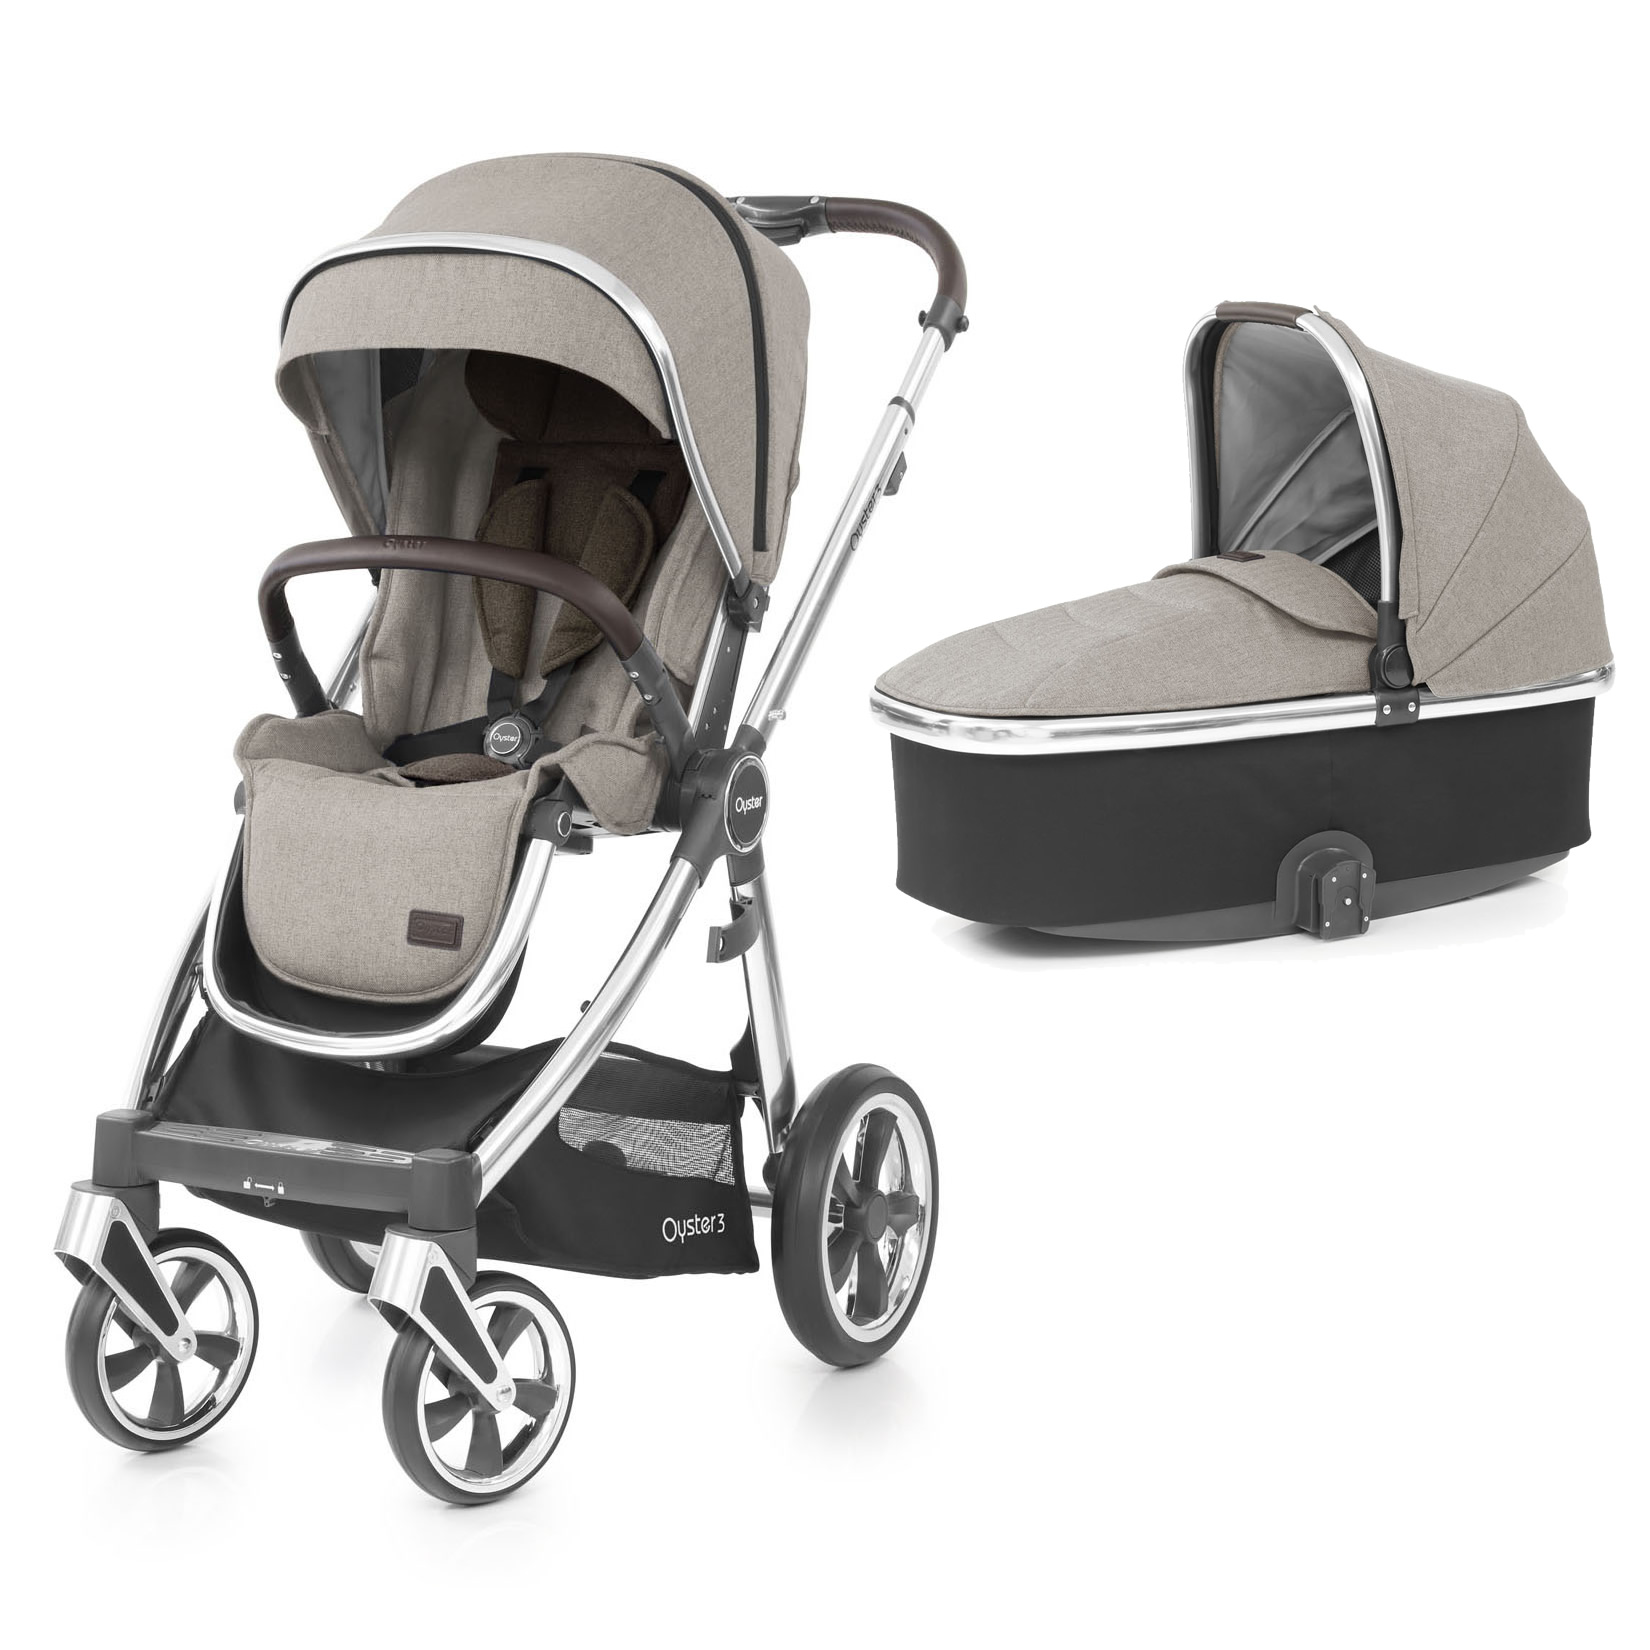 oyster carrycot raincover